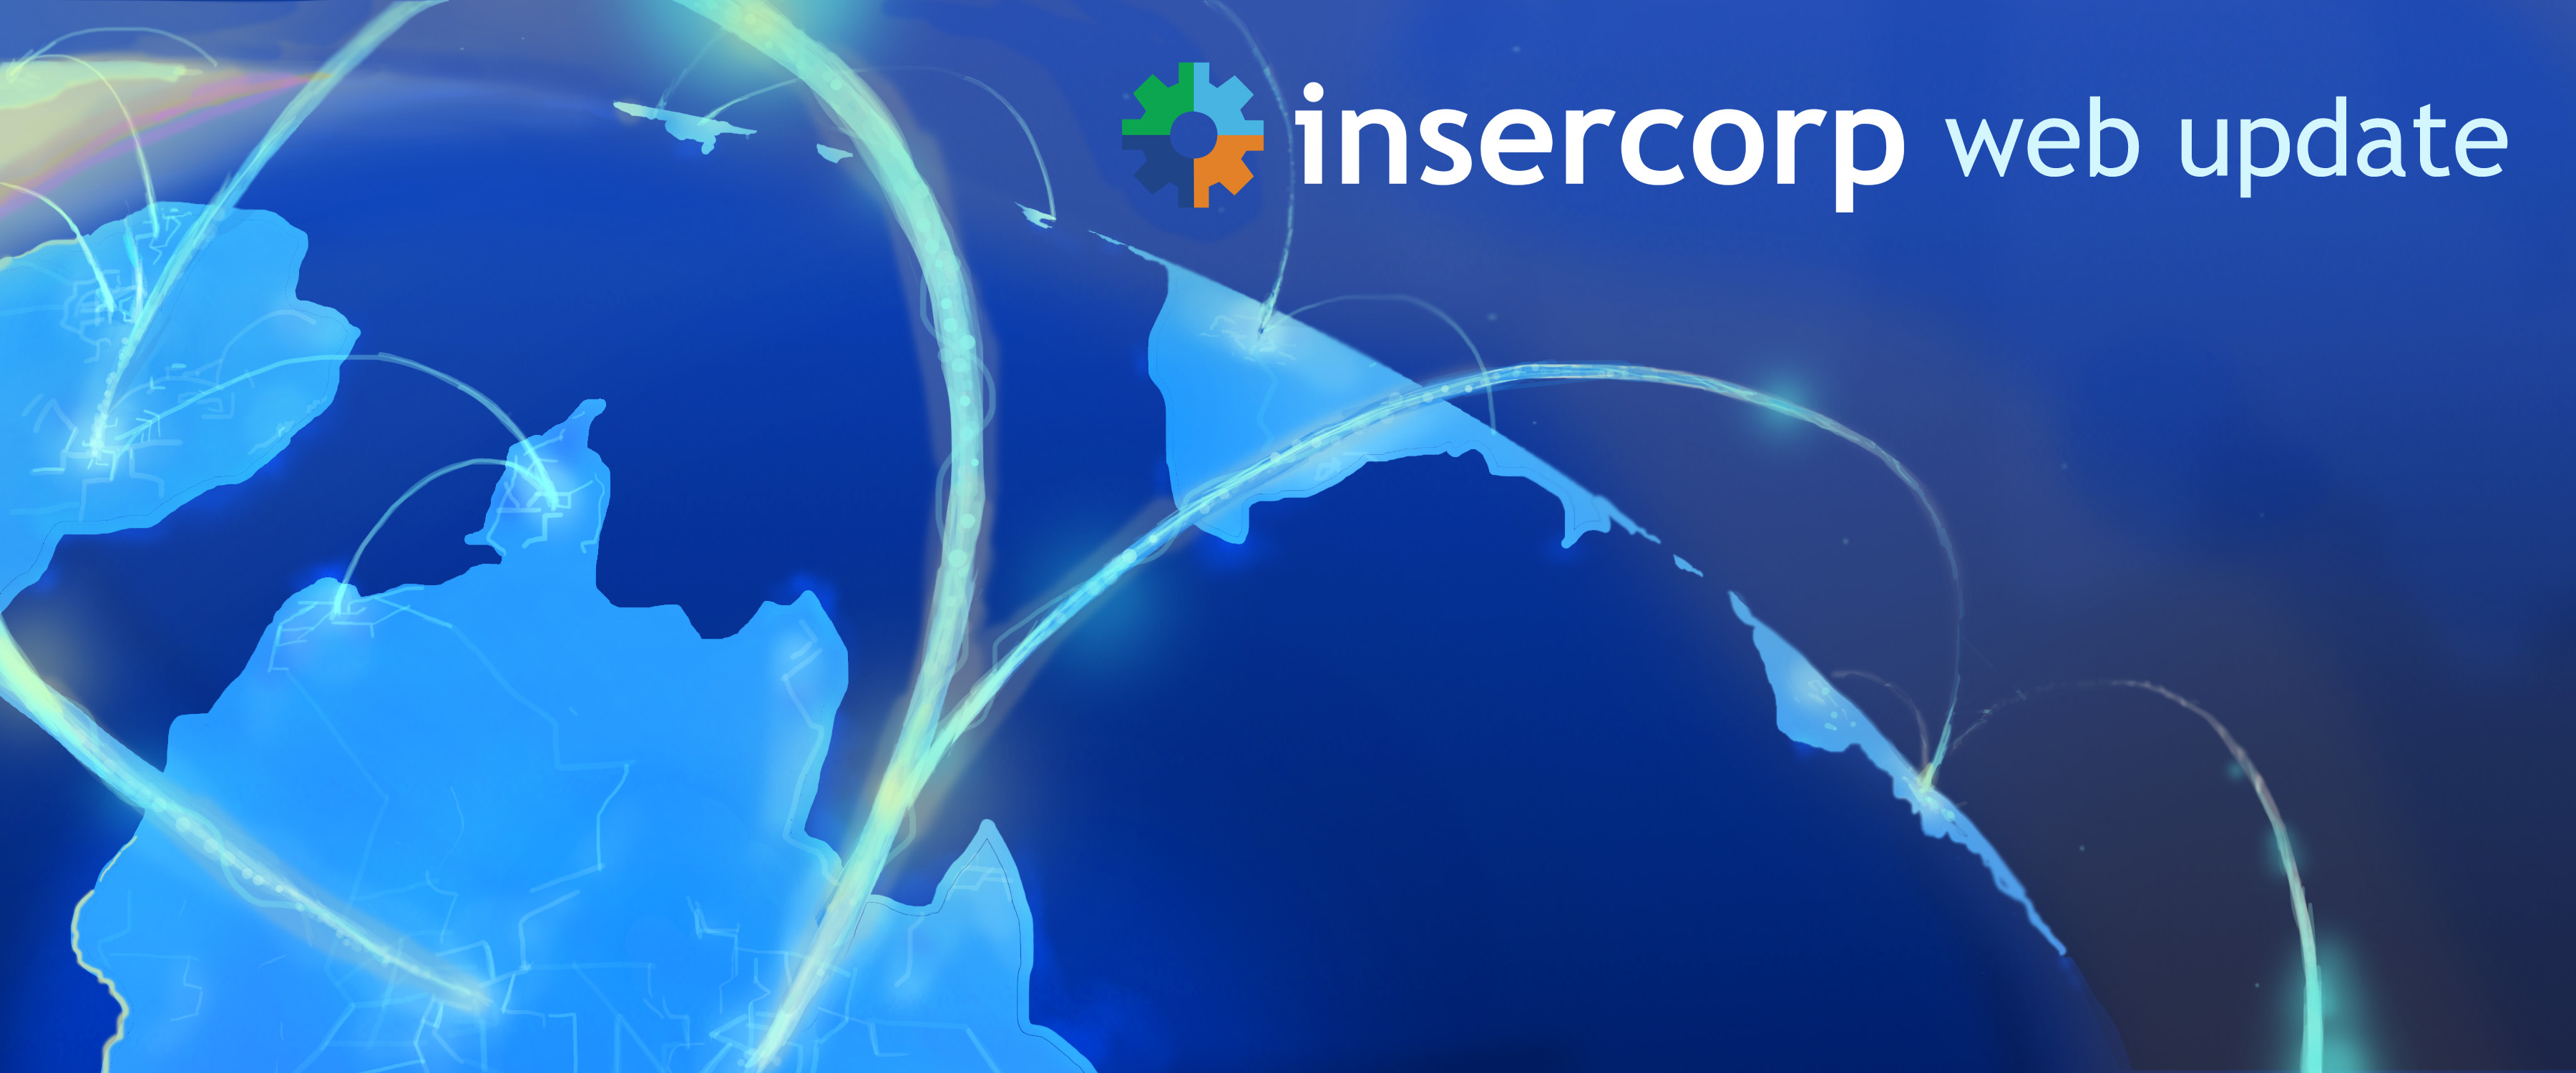 INSERCORP LAUNCHES A WEBSITE GEARED TOWARDS THE FUTURE OF CAREER SEARCHES AND OUR ENVIRONMENT